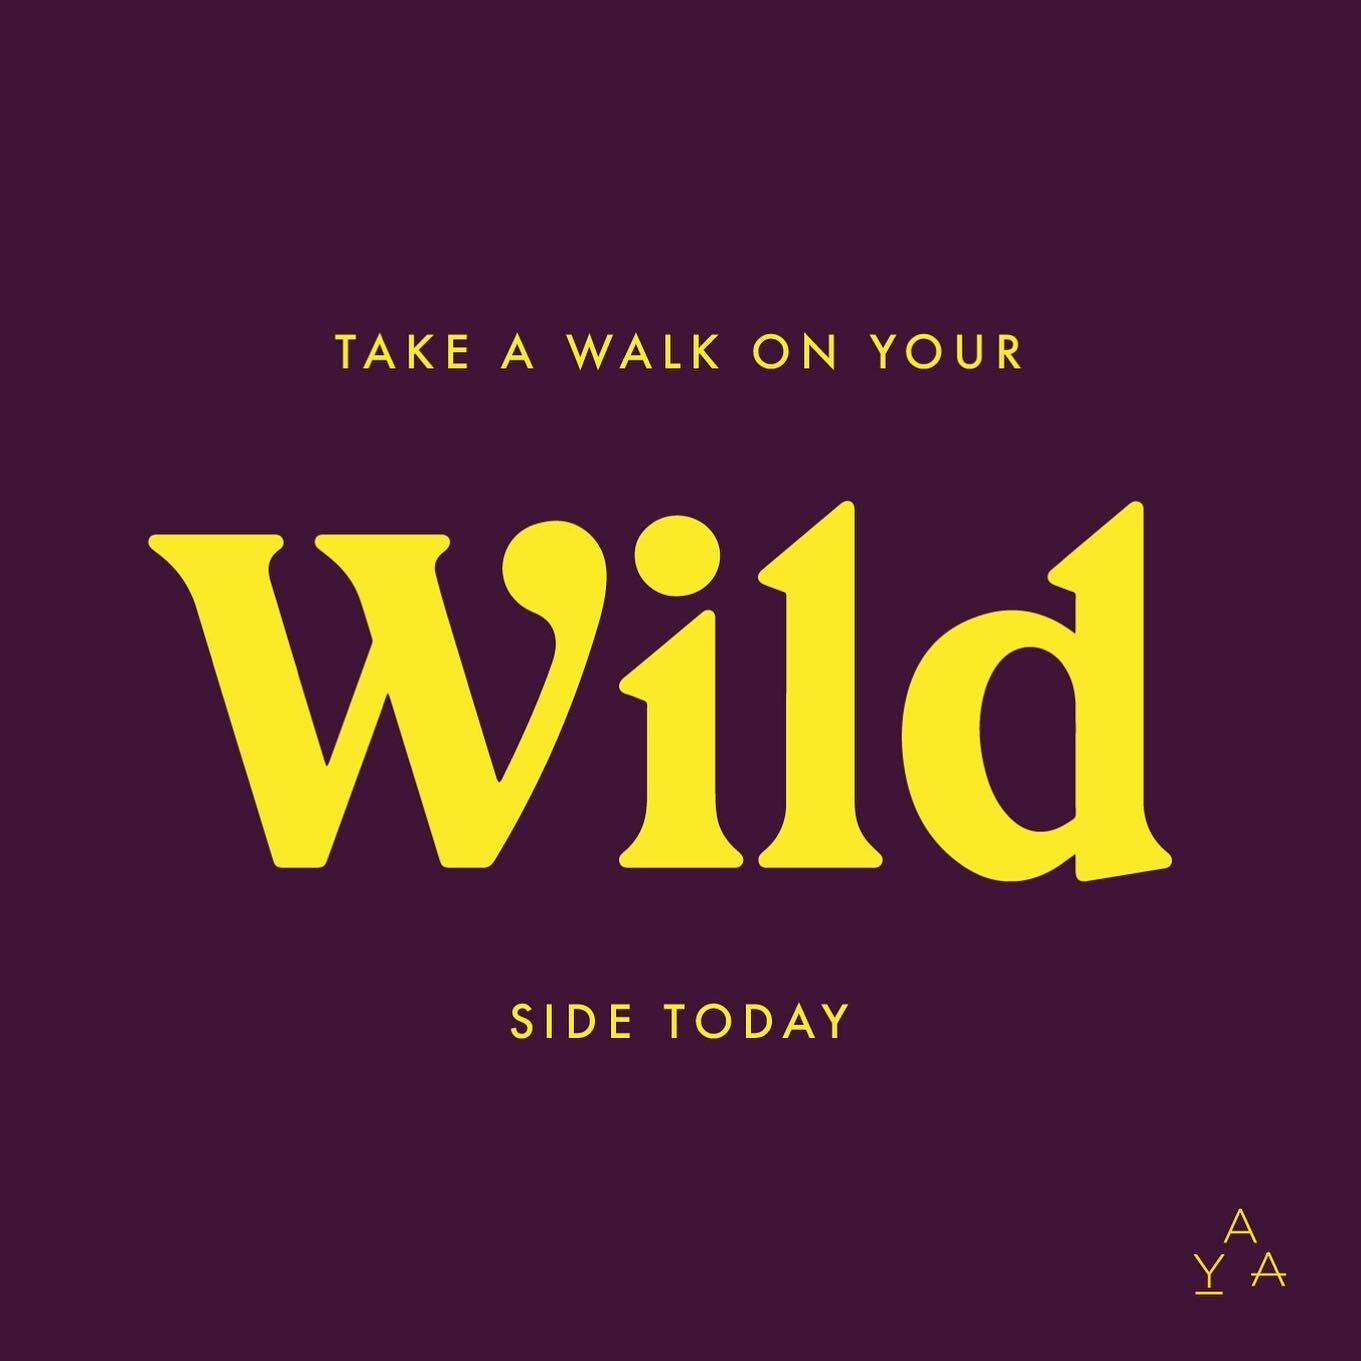 Take a walk on your wild side ;) what would you do? Something outside of your comfort zone? Take a step in the right direction. Begin something new....

#wild #love #clash #asyouare #design #daretobedifferent #stepsintherightdirection #design #poster